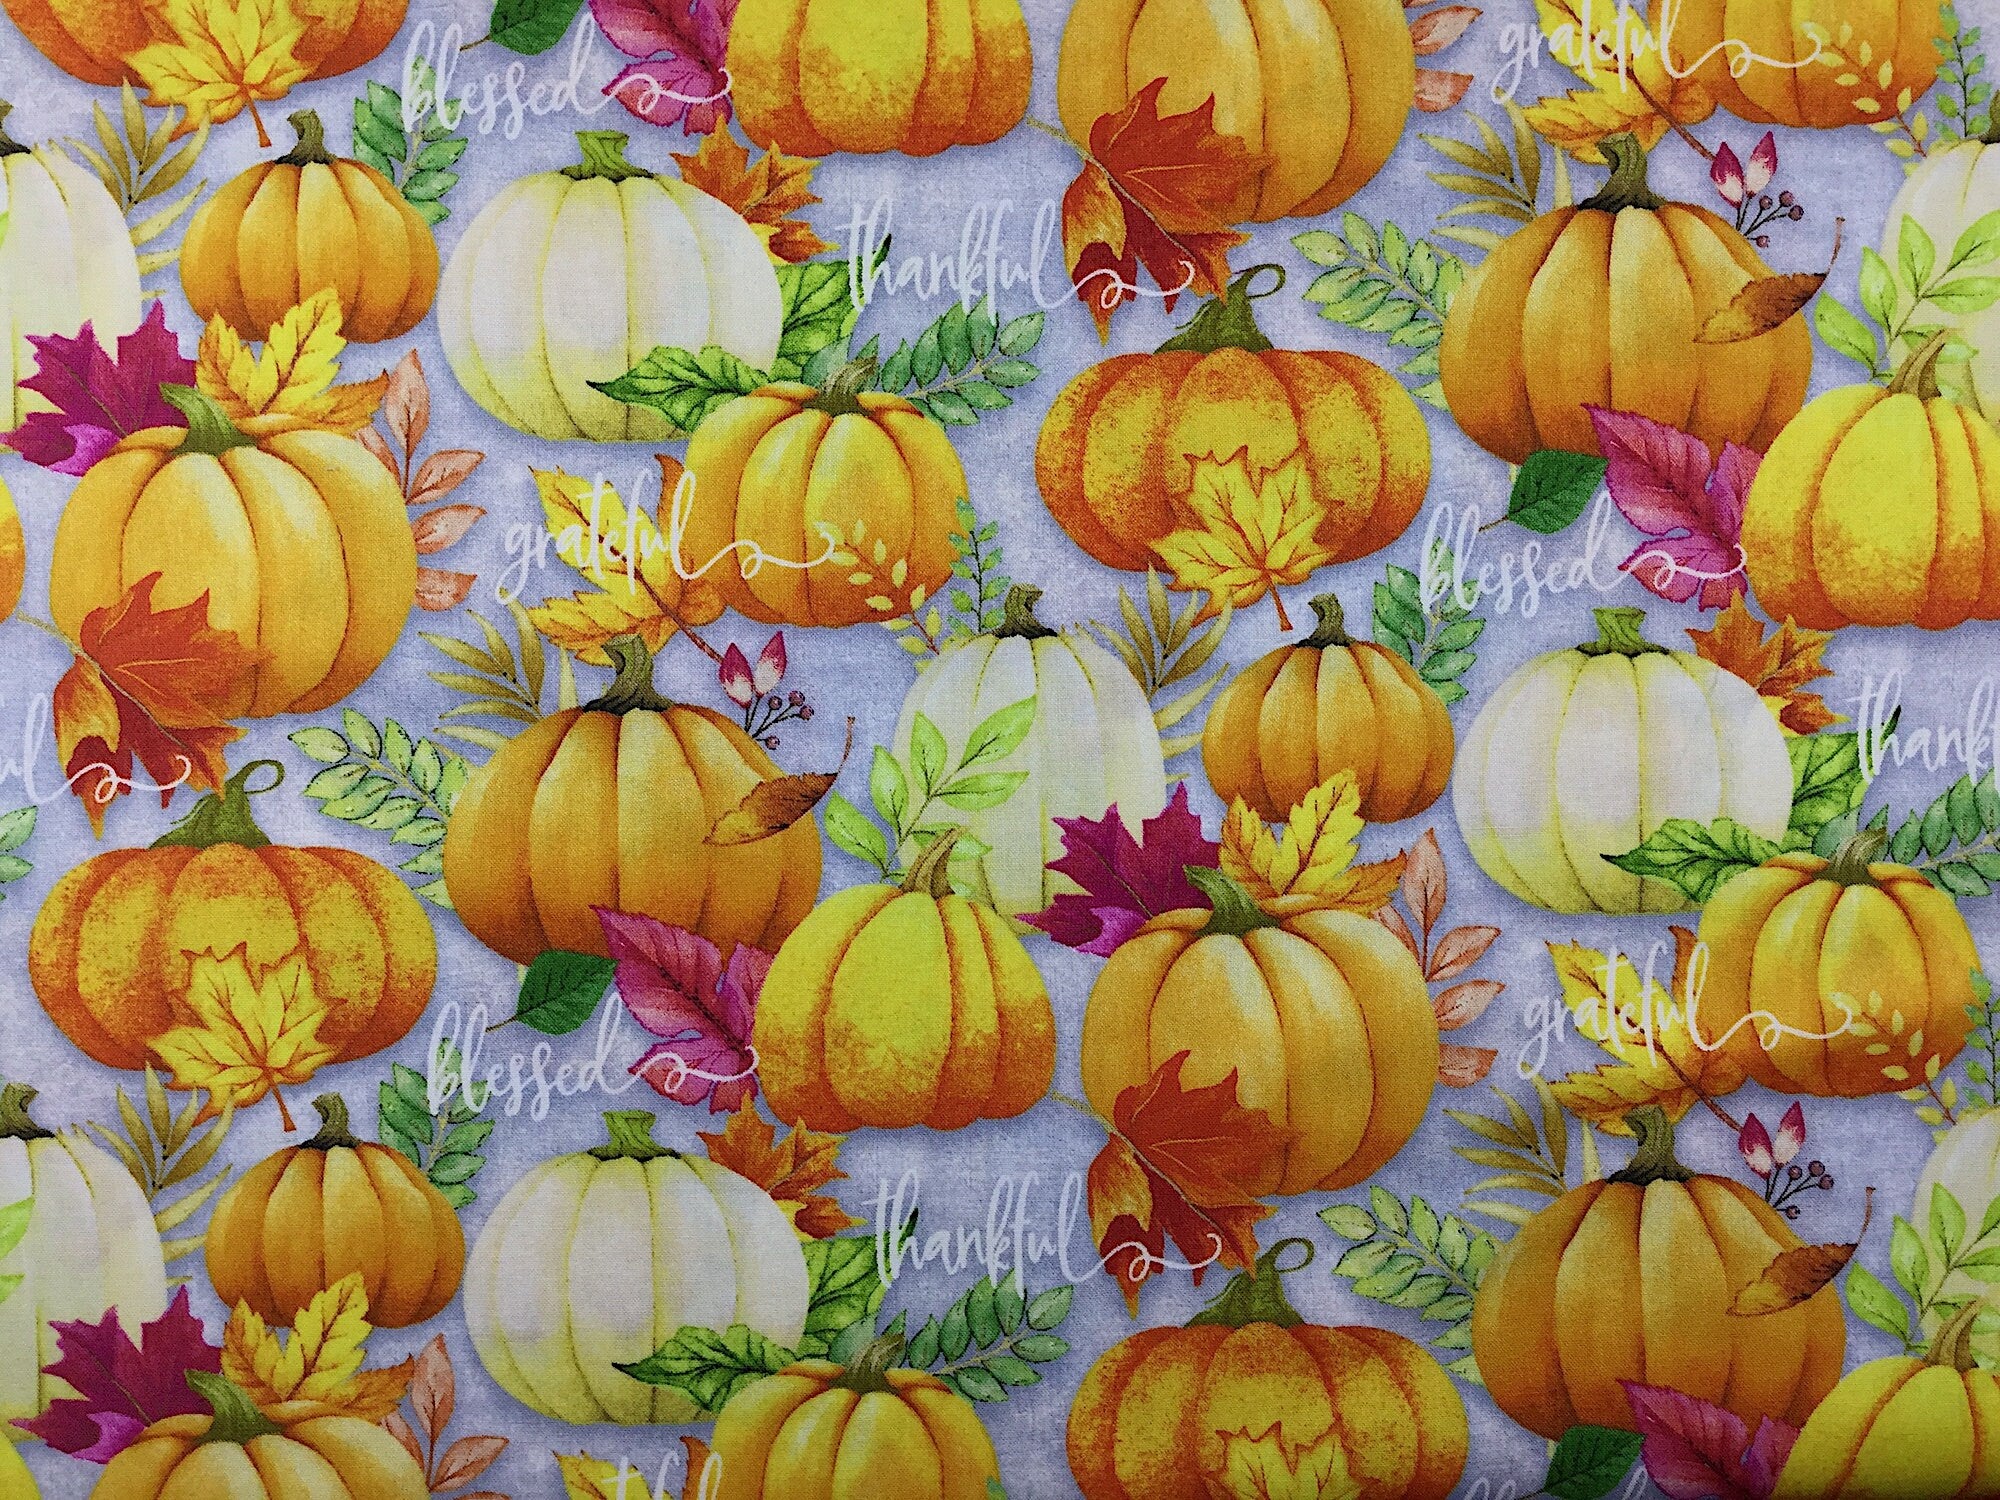 This fabric is covered with many pumpkins of different colors and sizes. There are sayings such as blessed, and thankful mixed in with the pumpkins and leaves on this gray fabric